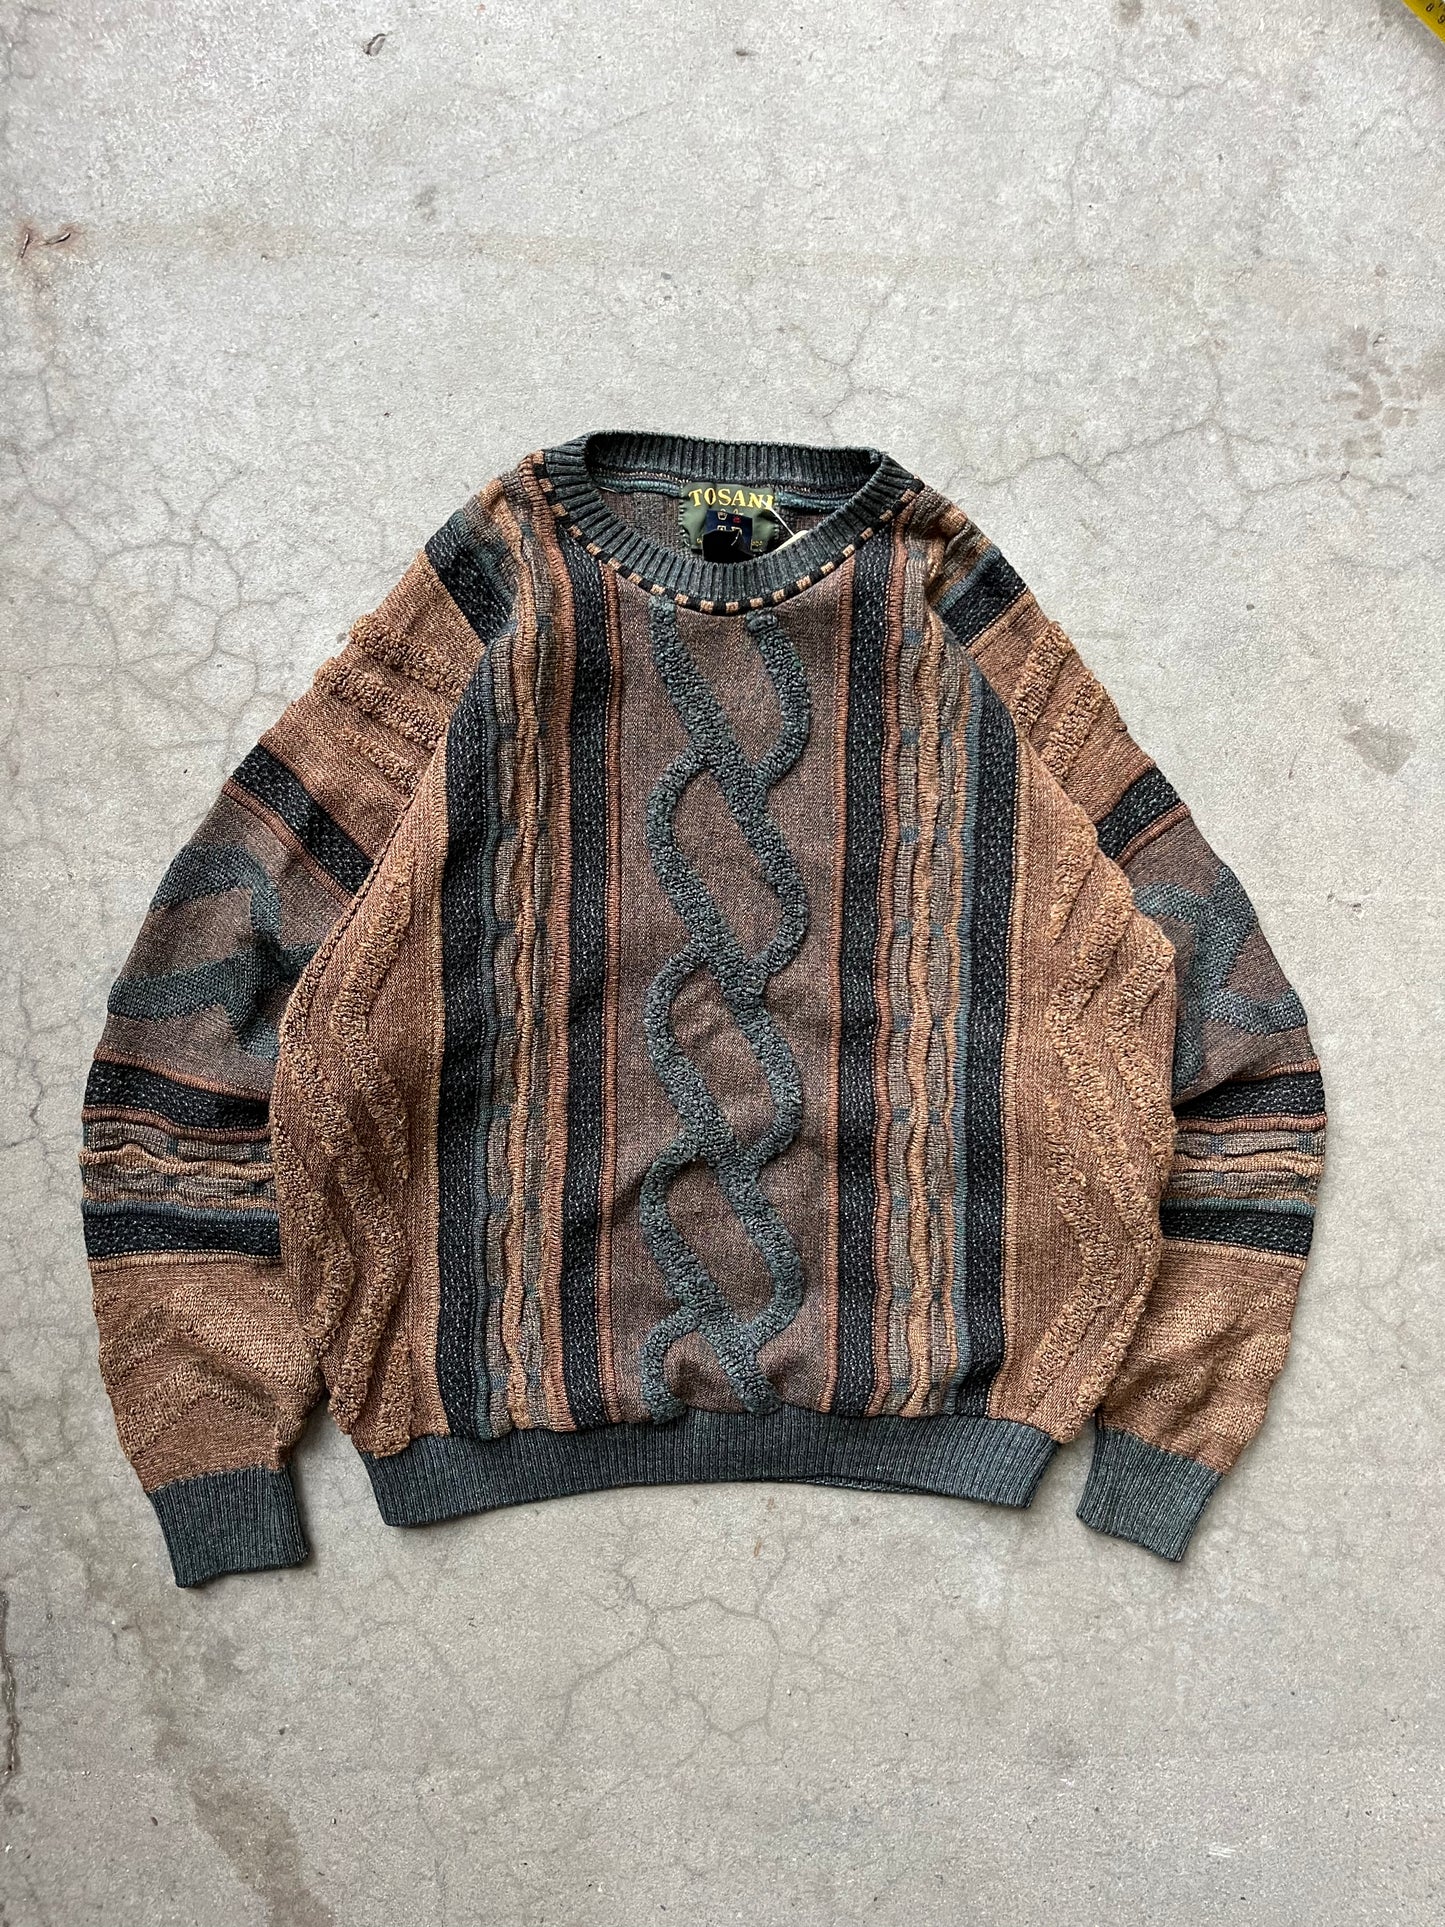 (S) 90s Tosani Textured Earth tone Knit